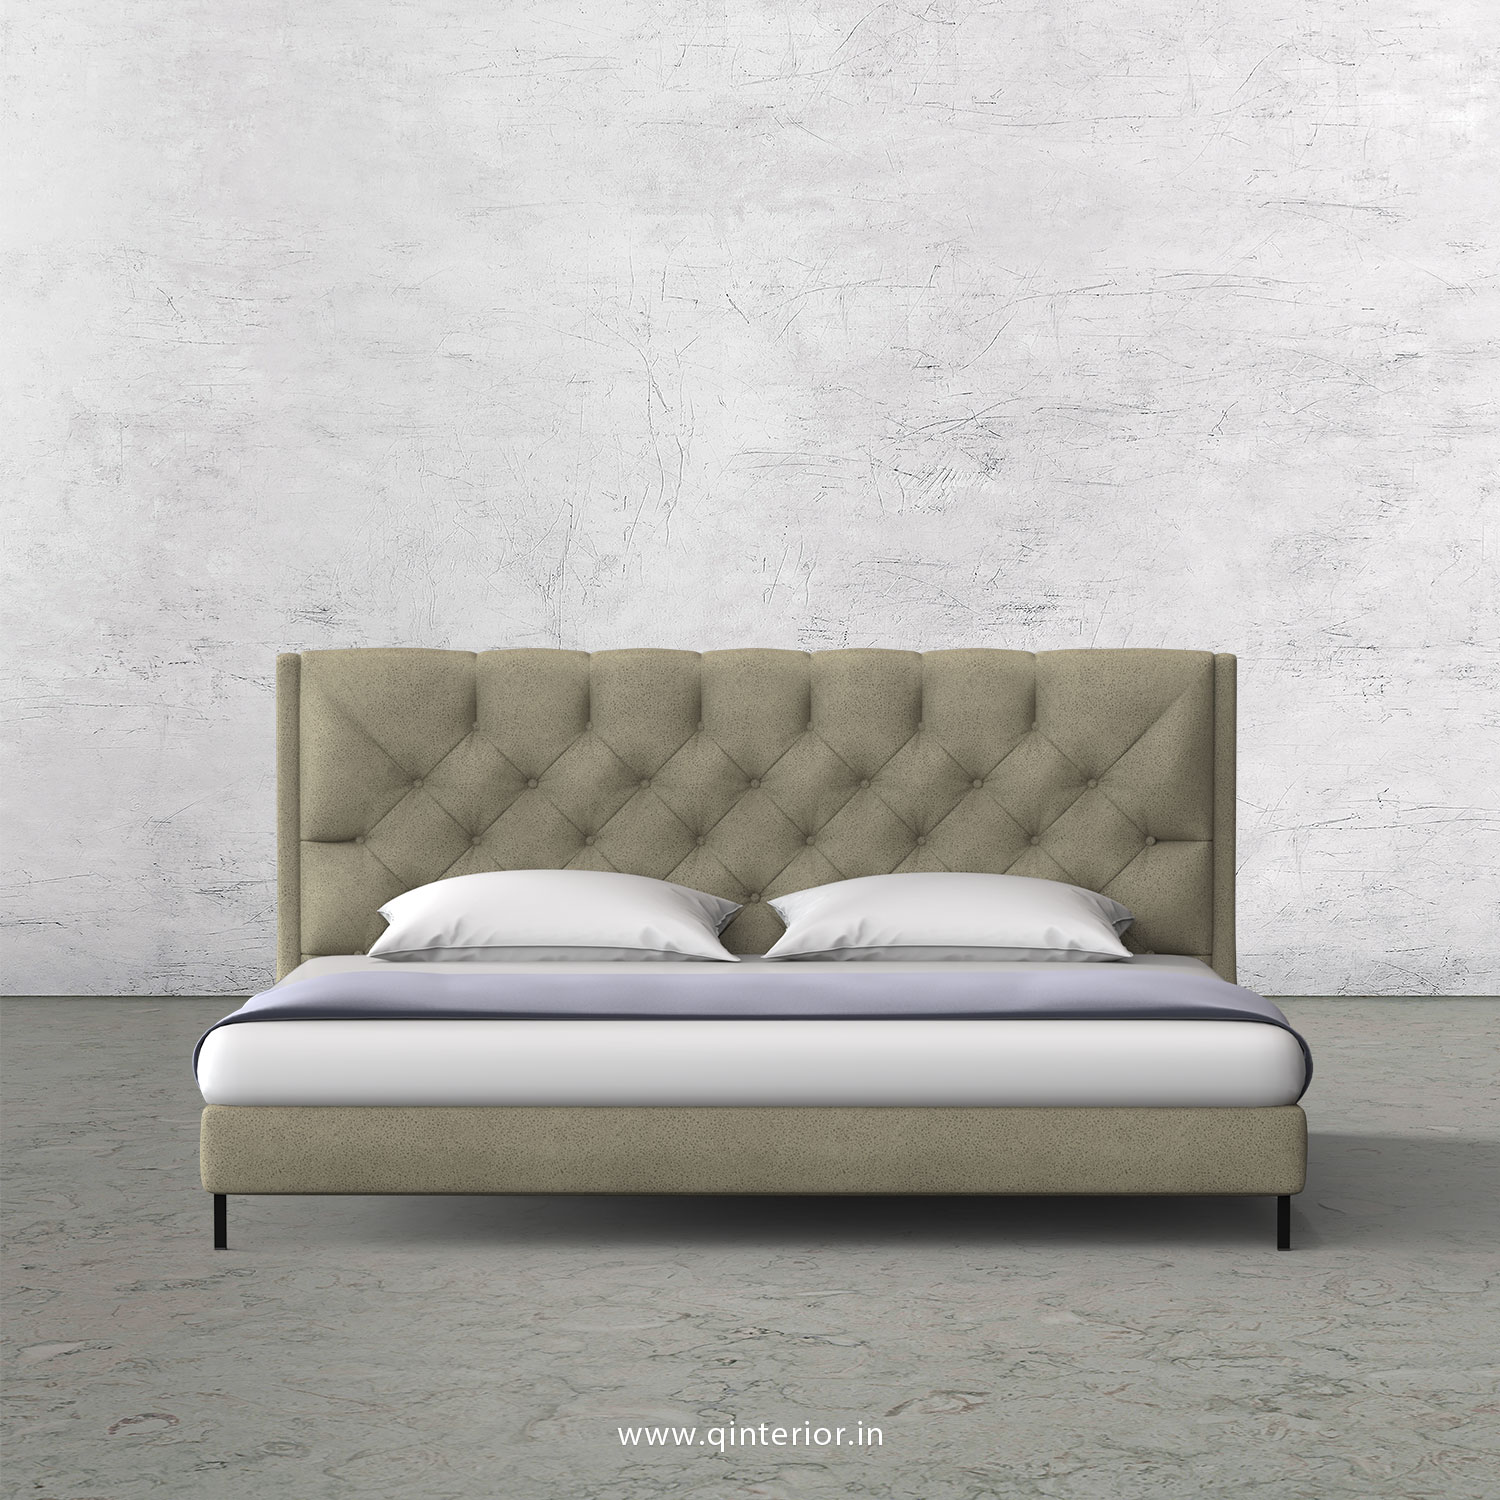 Scorpius King Size Bed in Fab Leather Fabric - KBD003 FL10